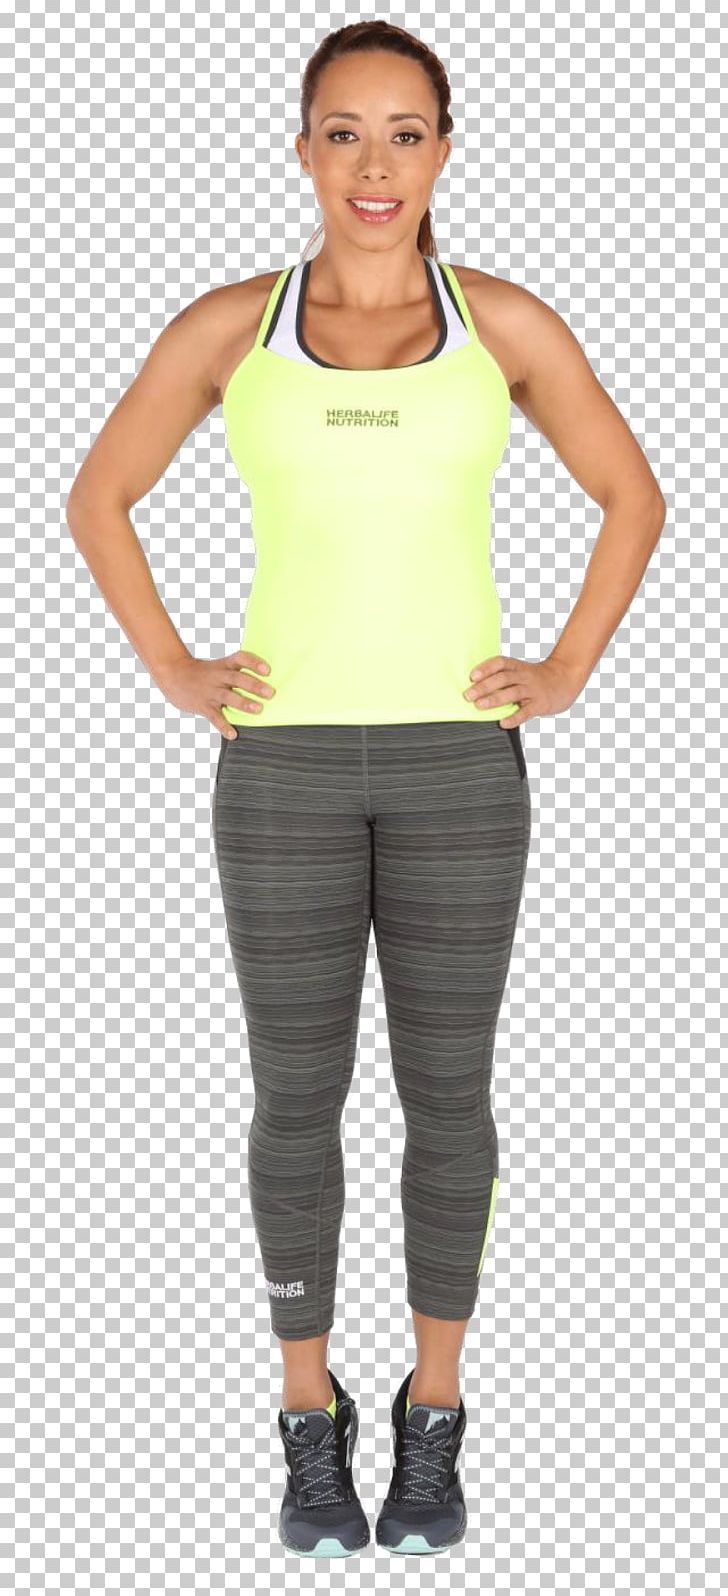 Herbalife Leggings Health Nutrition Philippines PNG, Clipart, Abdomen, Active Undergarment, Clothing, Concern, Health Free PNG Download